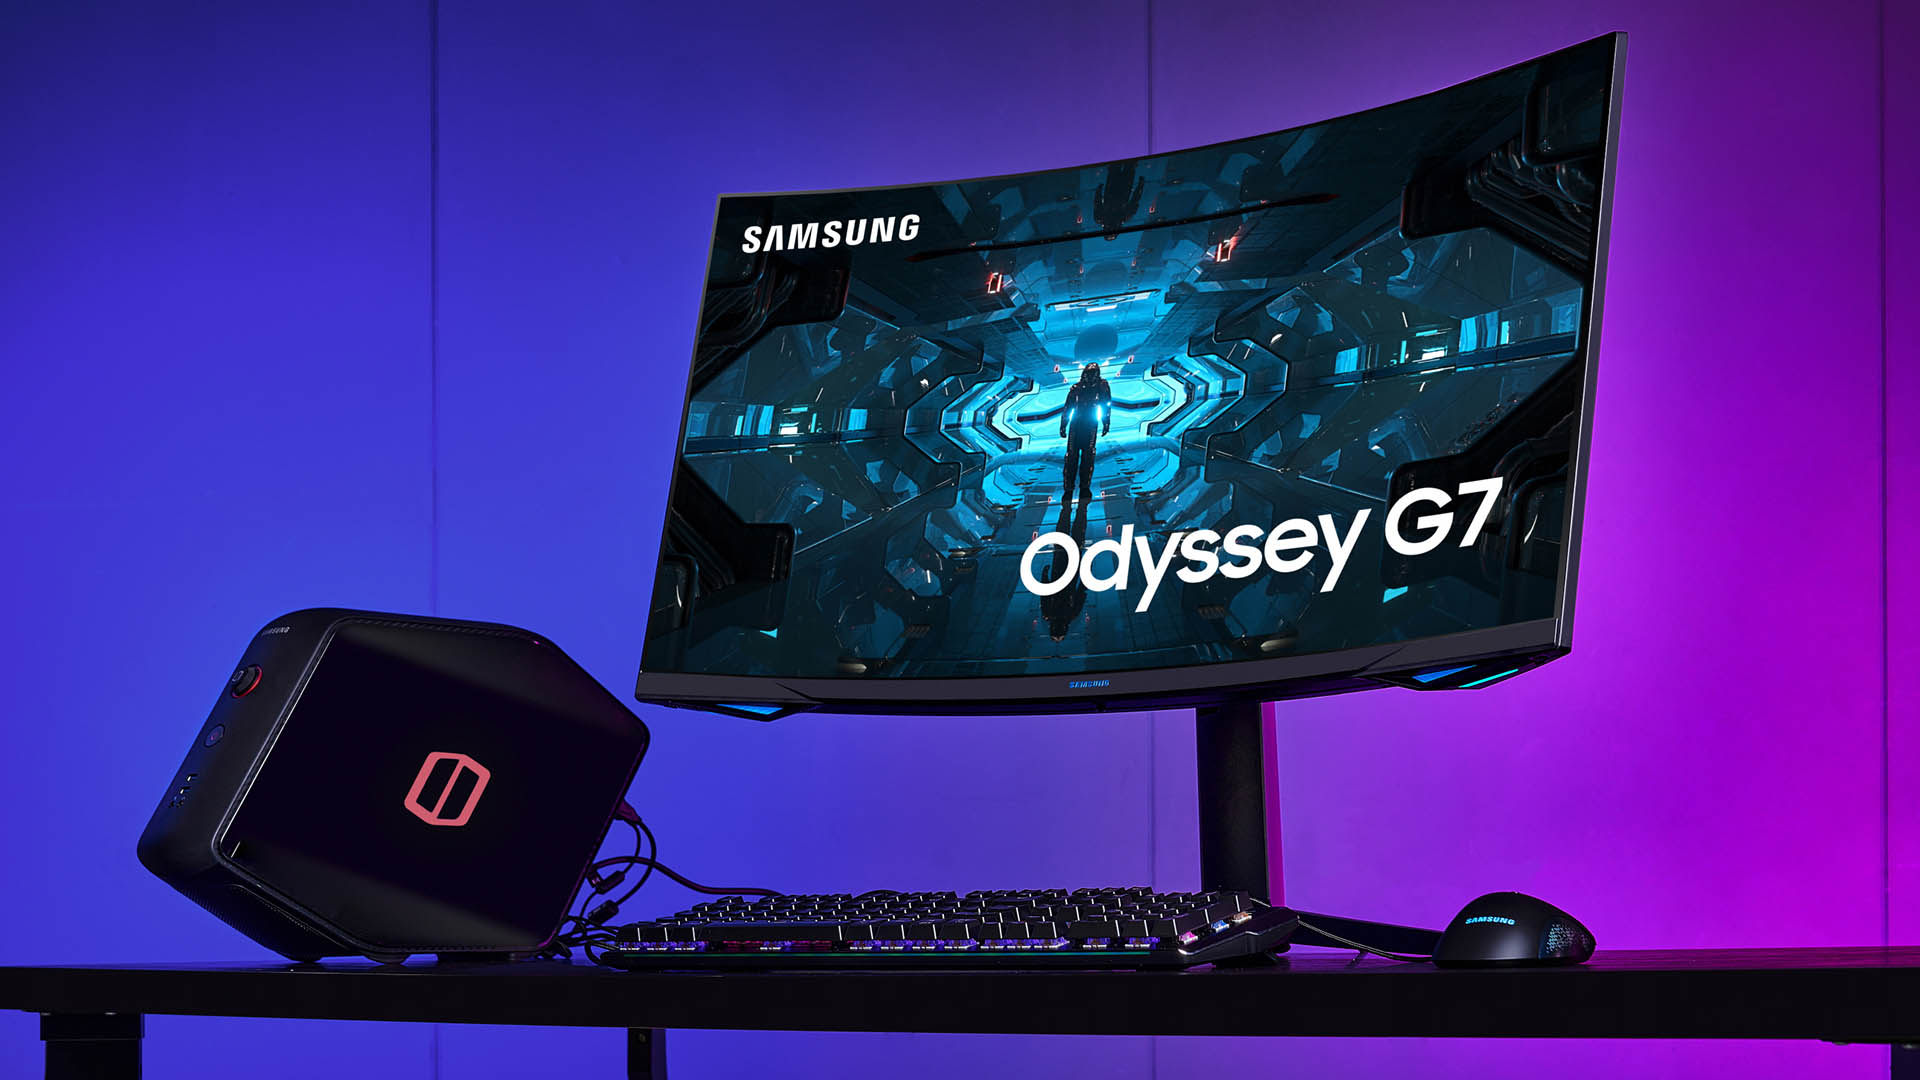 New Firmware Appears To Fix Samsung G7 Odyssey Monitor Flickering Issue Pc Gamer